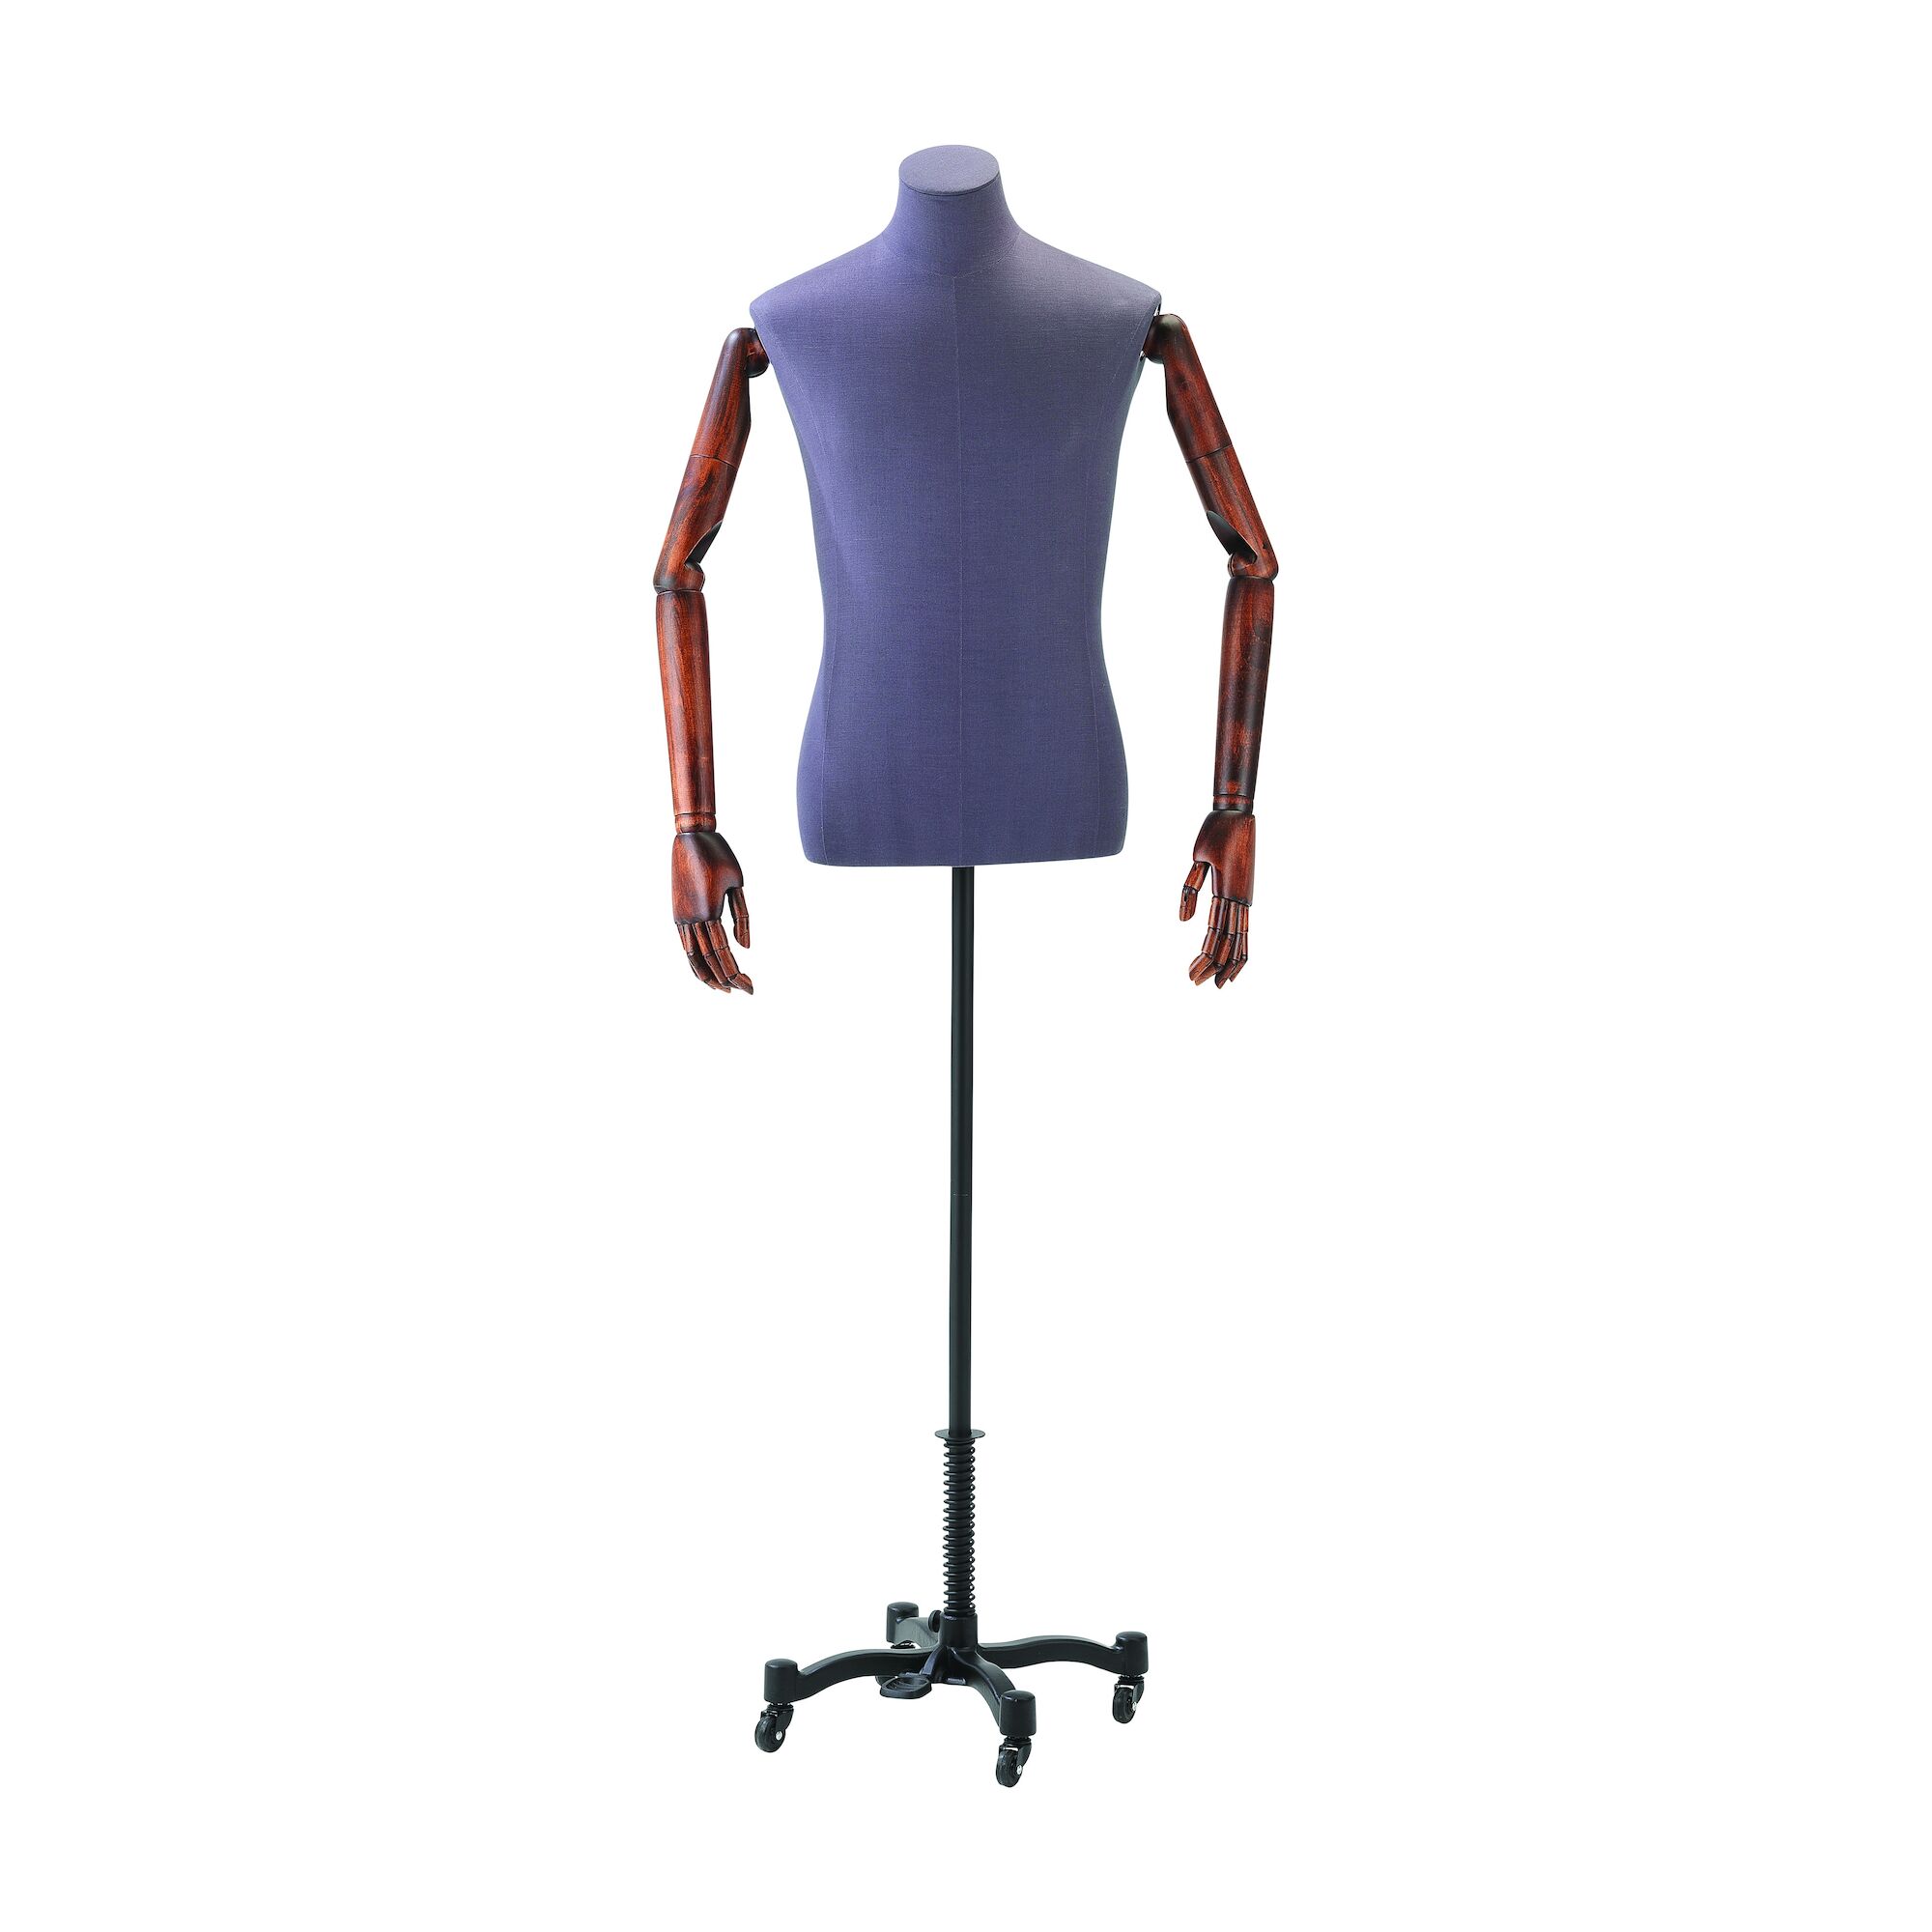 Male Articulated Tailors Dummies